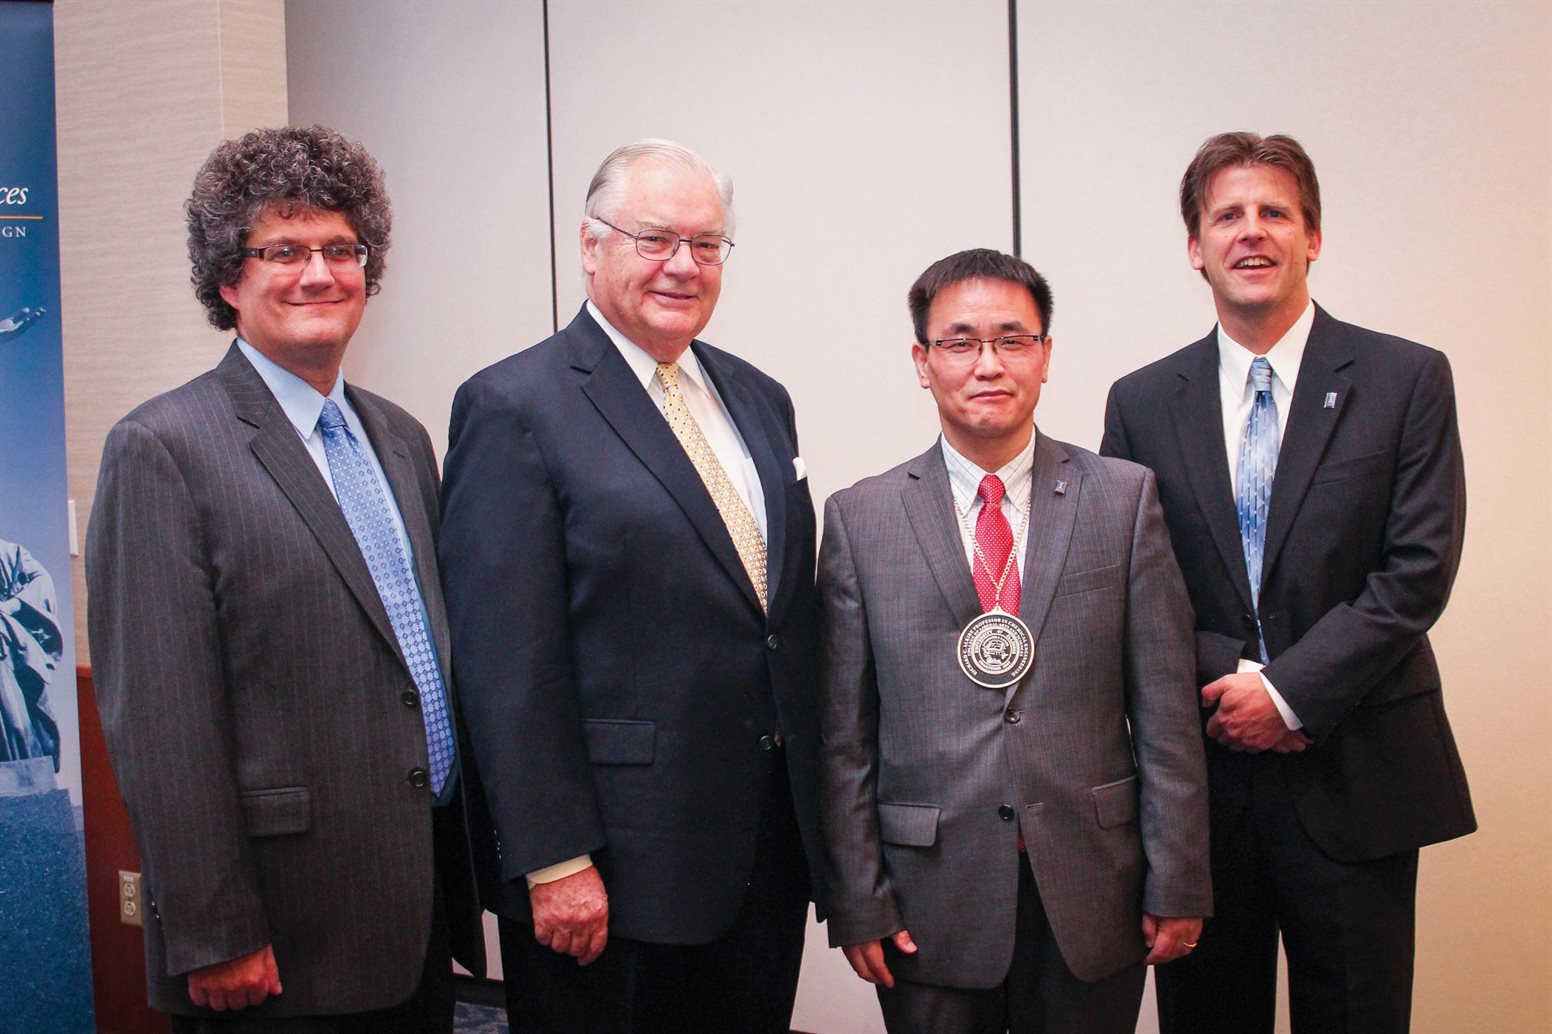 From left to right: Professors Jonathan Sweedler, Richard Alkire, Hong Yang, and Paul Kenis at Yang's investiture in 2015.